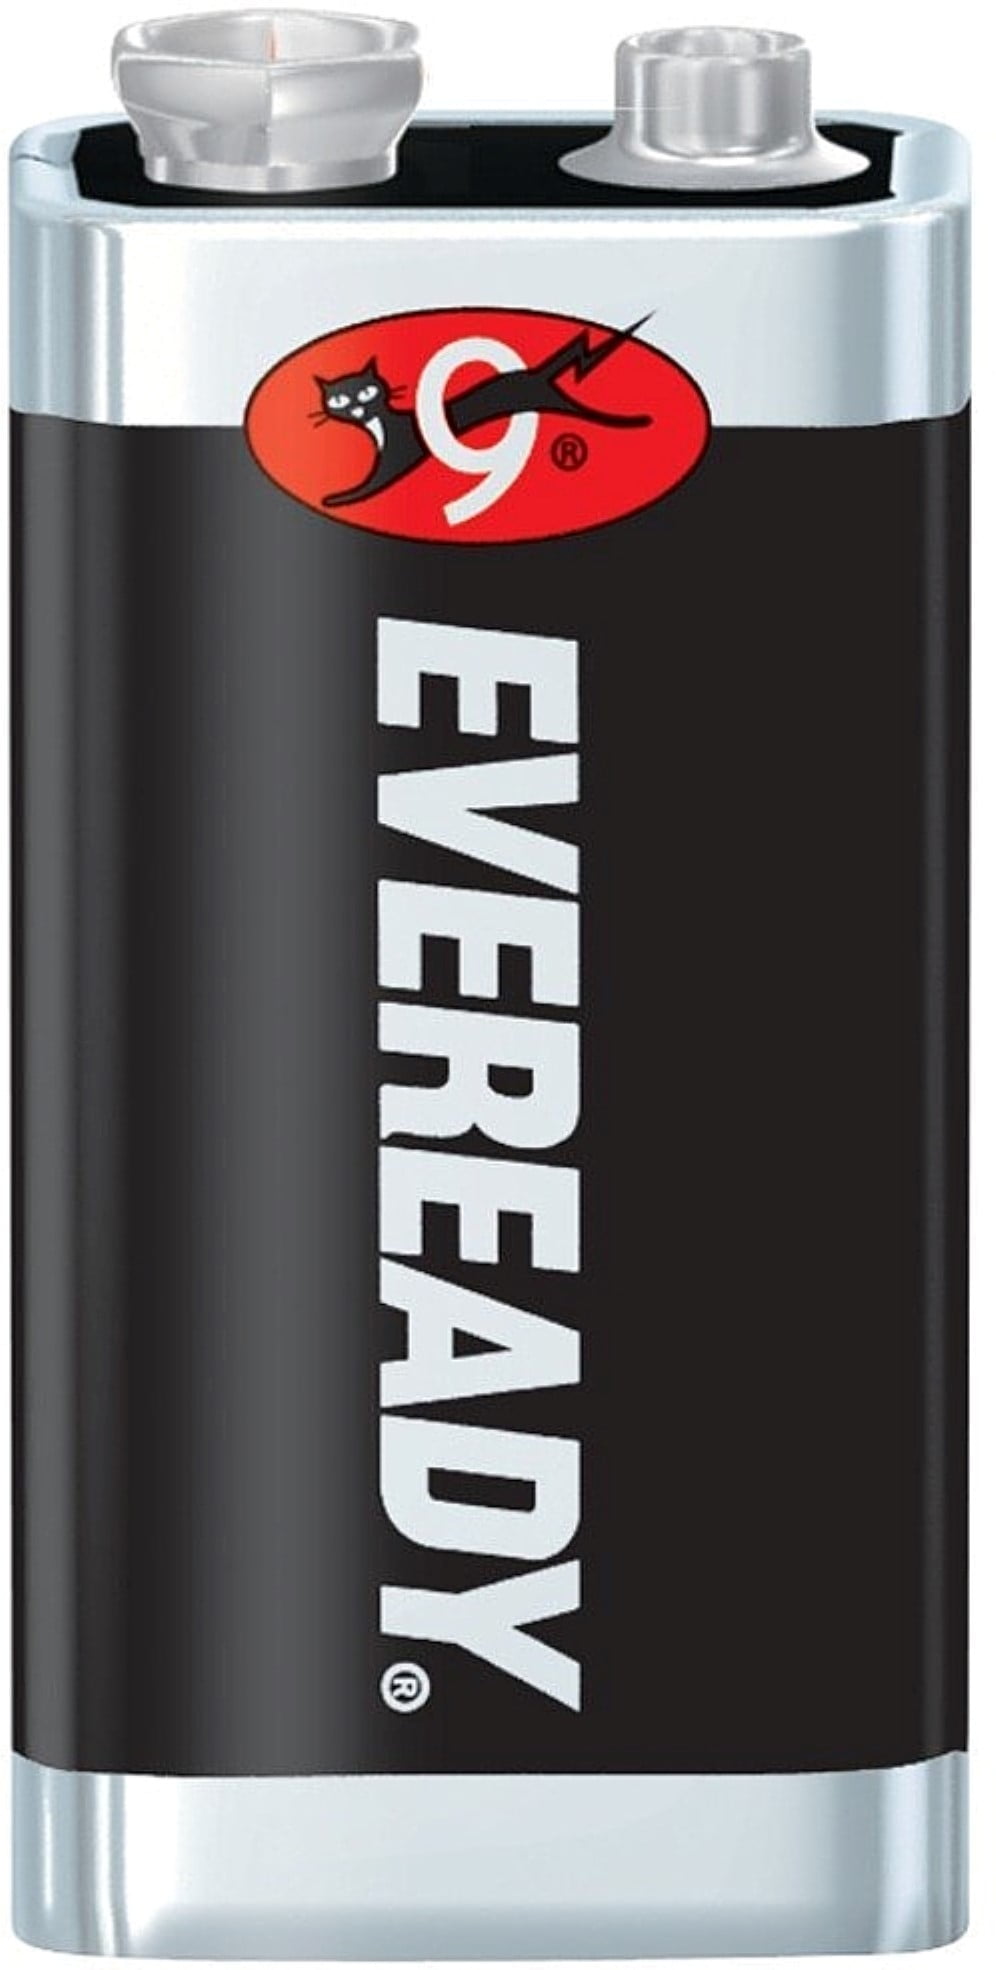 EVEREADY Battery 9 Volt Lives 12" x 9" New Reproduction Aluminum Sign 